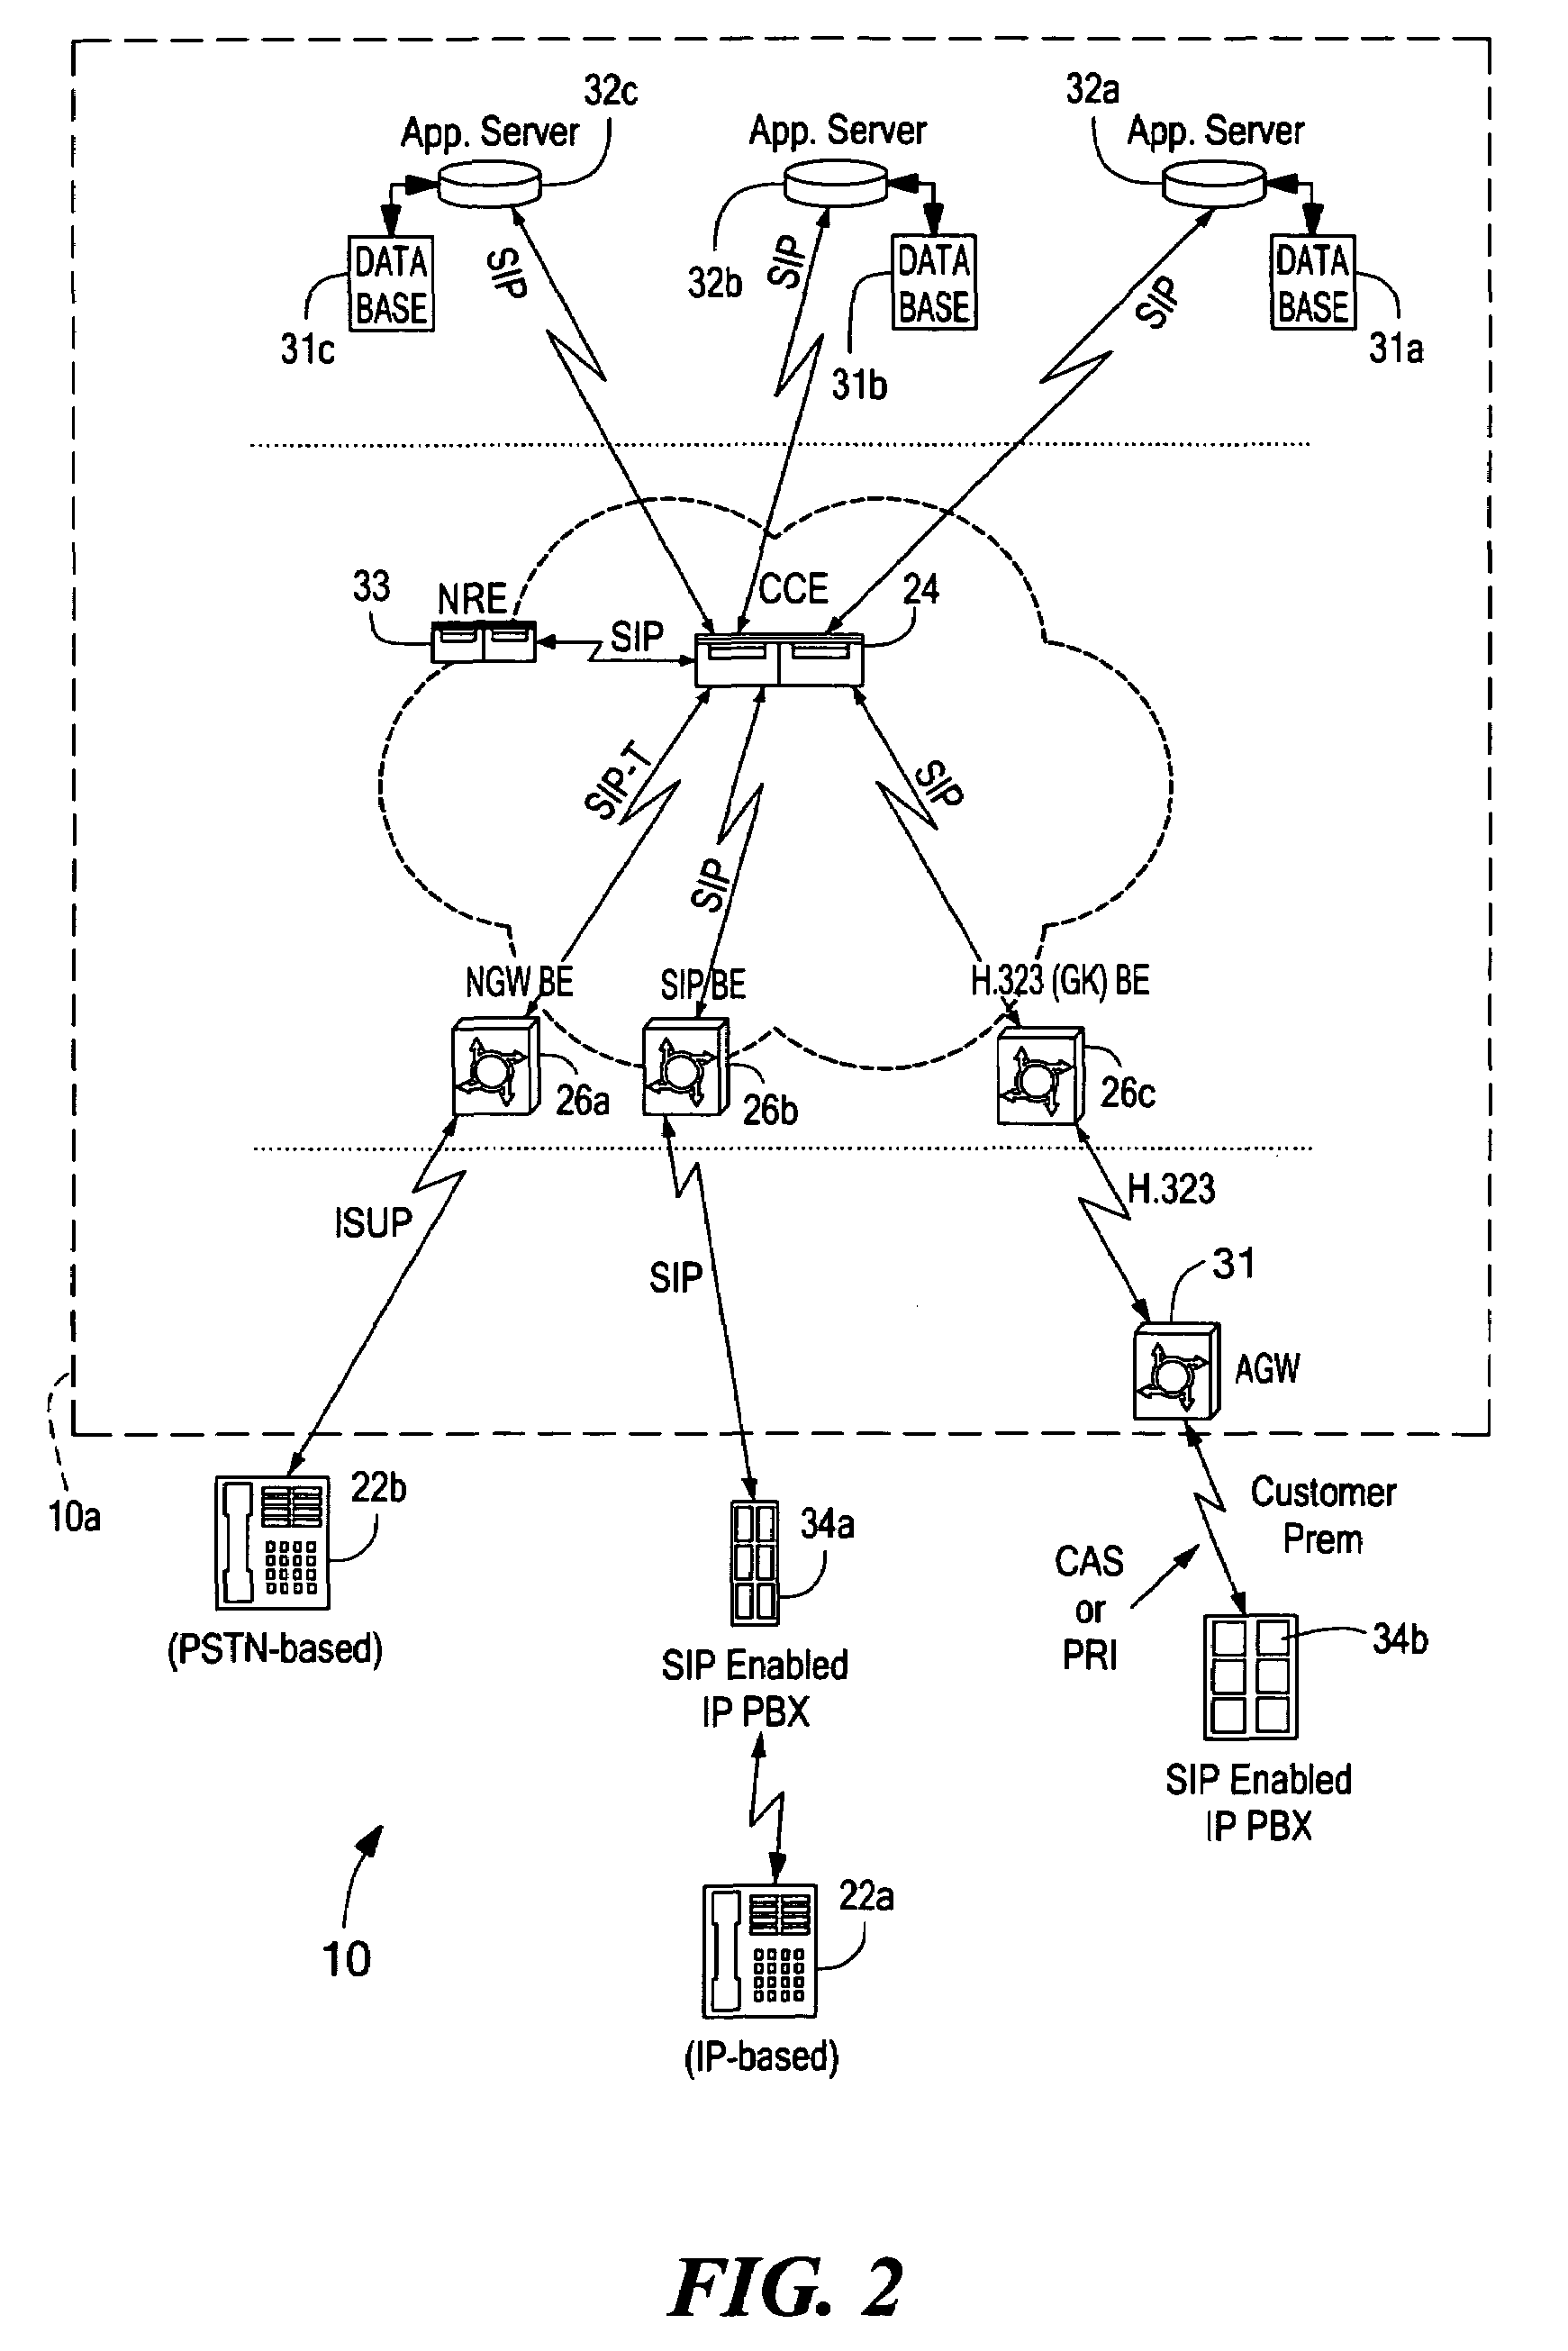 Call control element constructing a session initiation protocol (SIP) message including provisions for incorporating address related information of public switched telephone network (PSTN) based devices